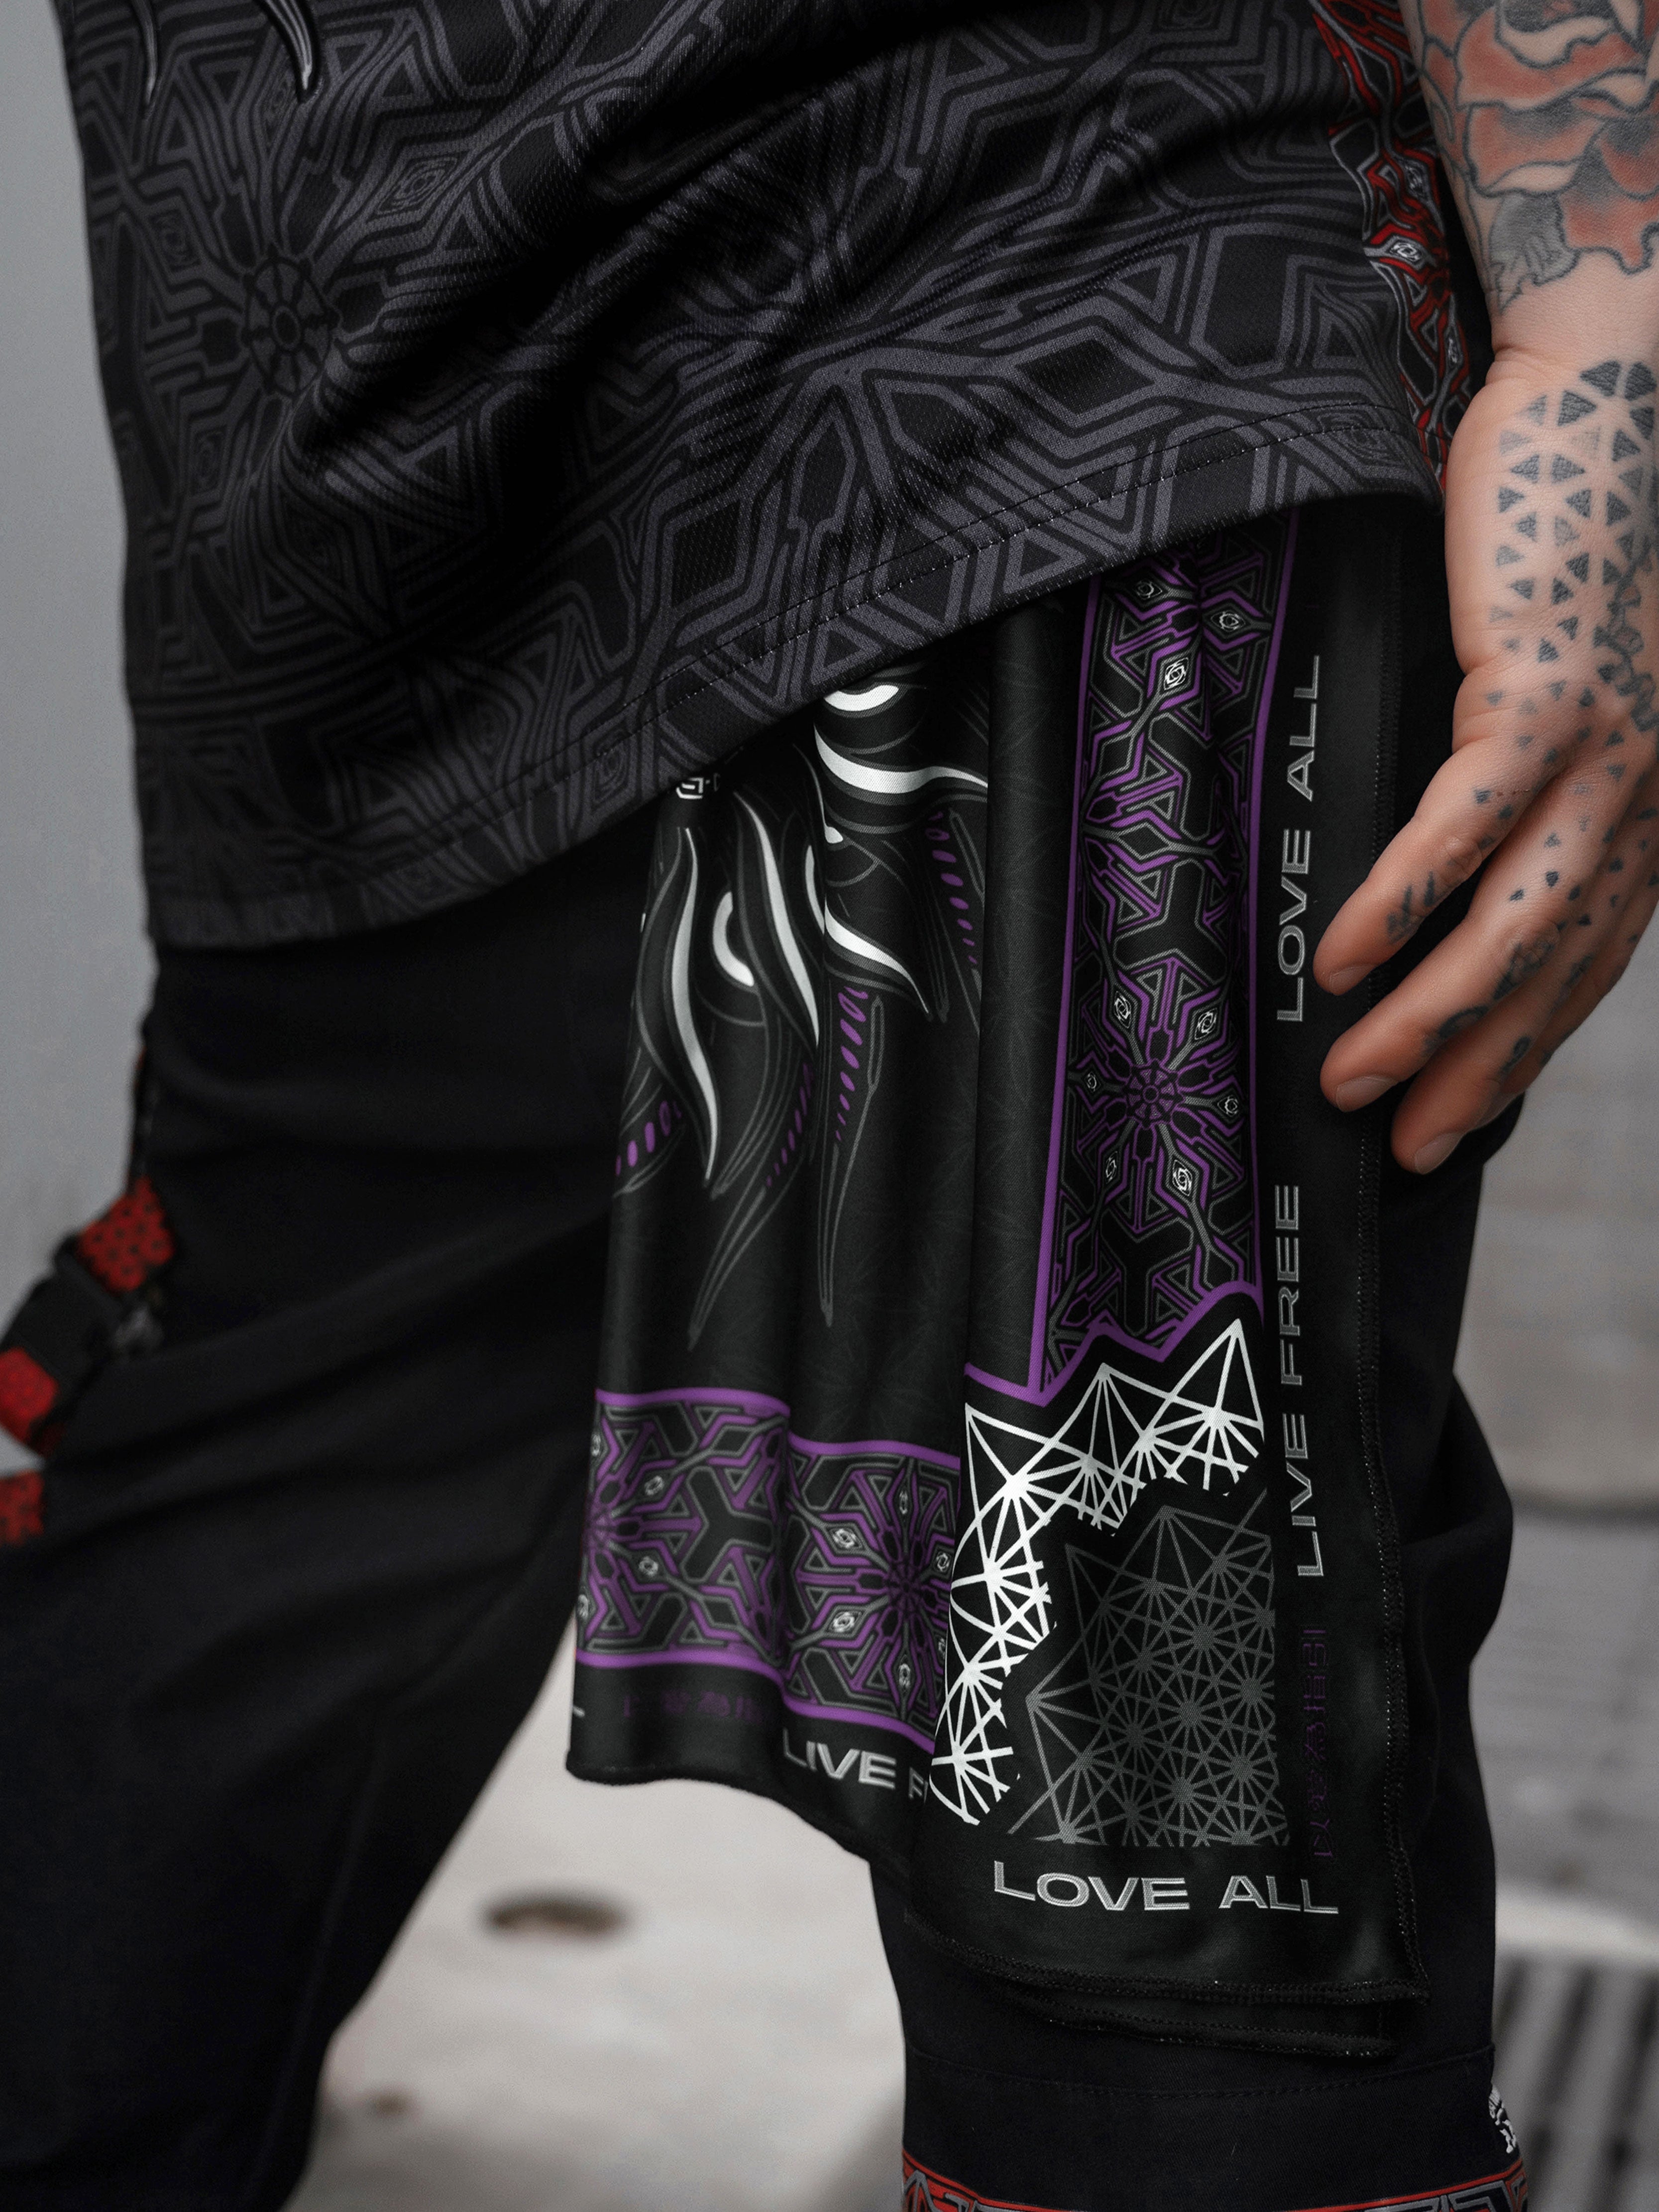 PRE-ORDER ✦ PROTECTED BY INTENT ✦ Lavender Double-sided Bandana Coming Soon 